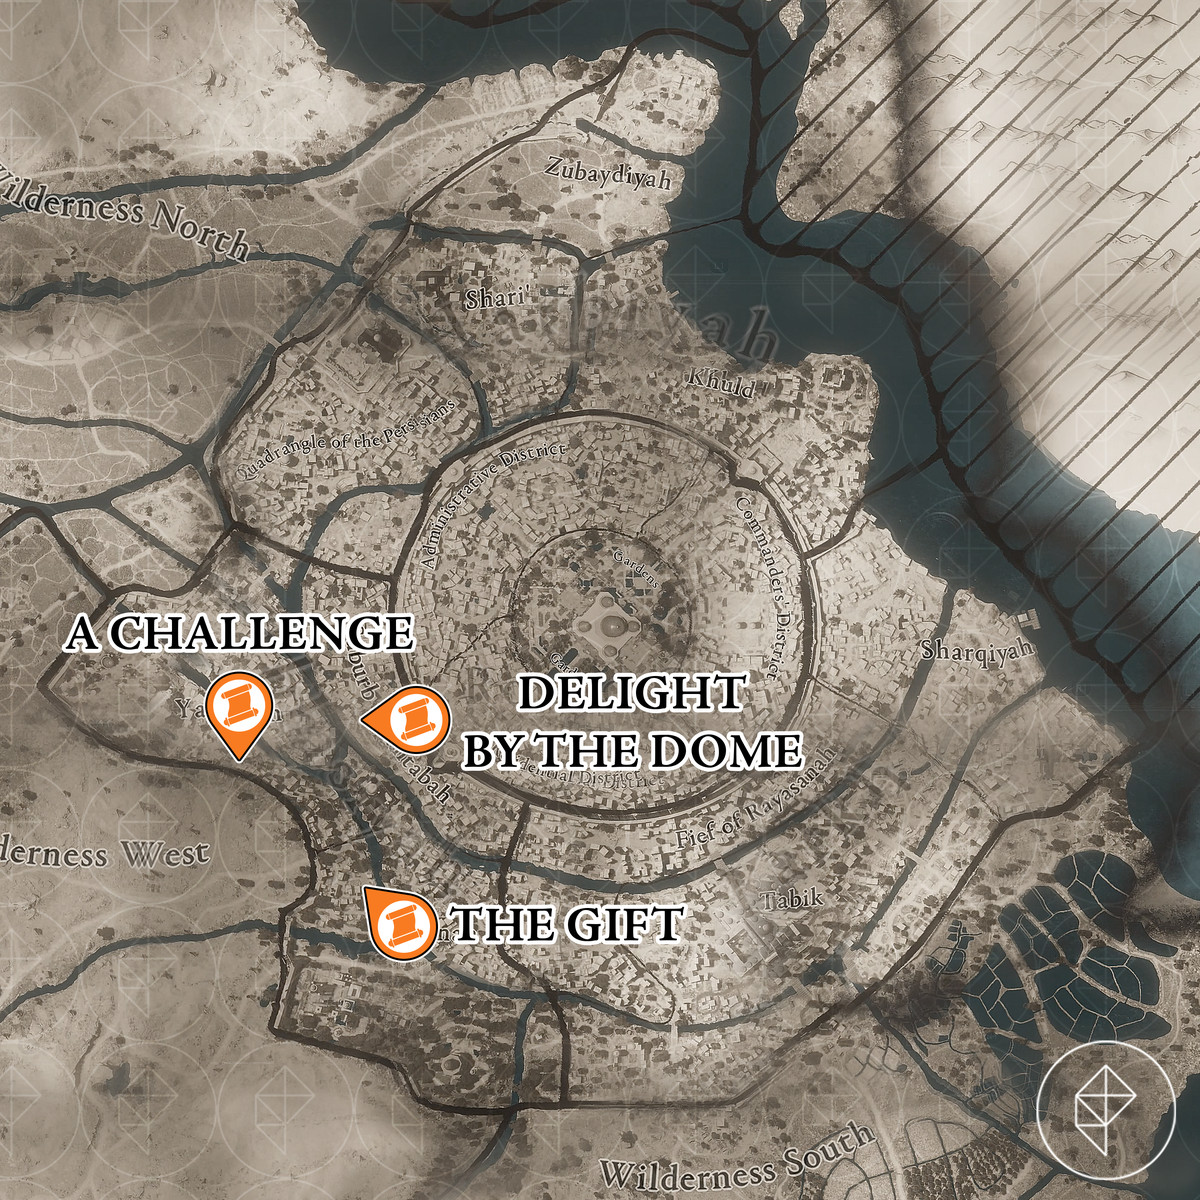 Assassin’s Creed Mirage map with Abbasiyah Enigmas and treasures marked